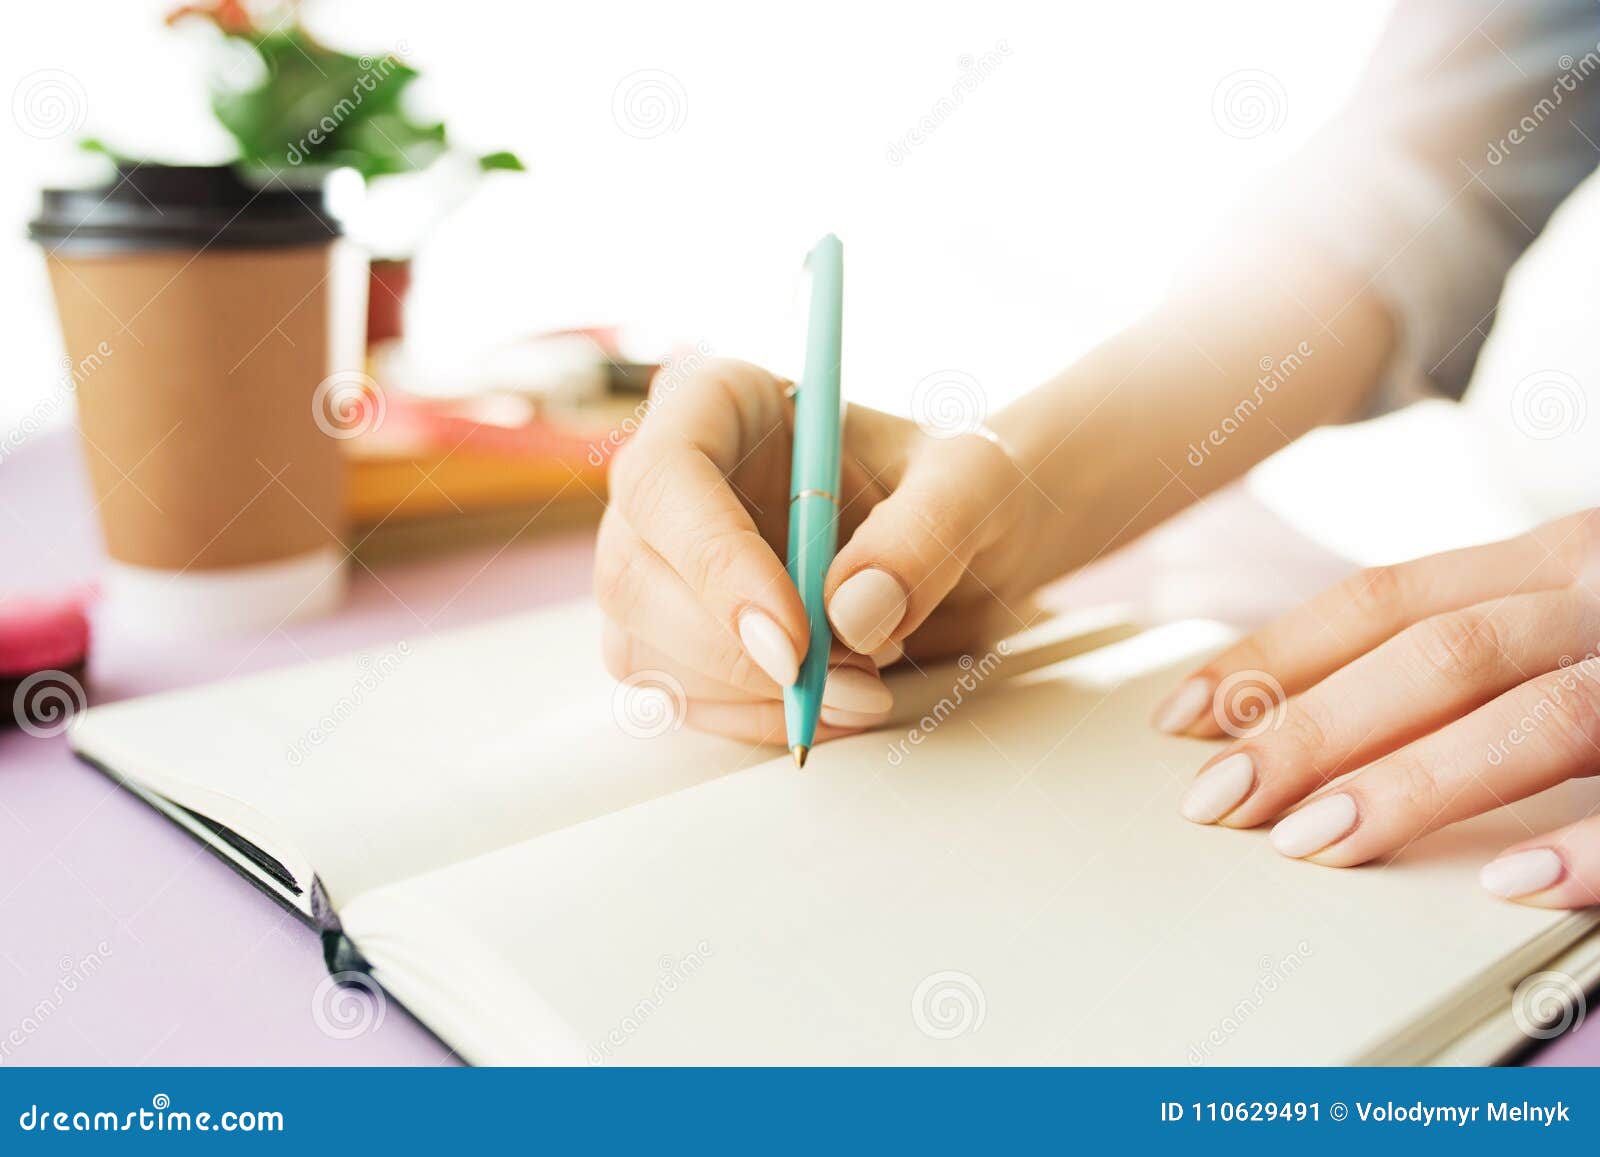 The Female Hands Holding Pen. the Trendy Pink Desk. Stock Image - Image ...